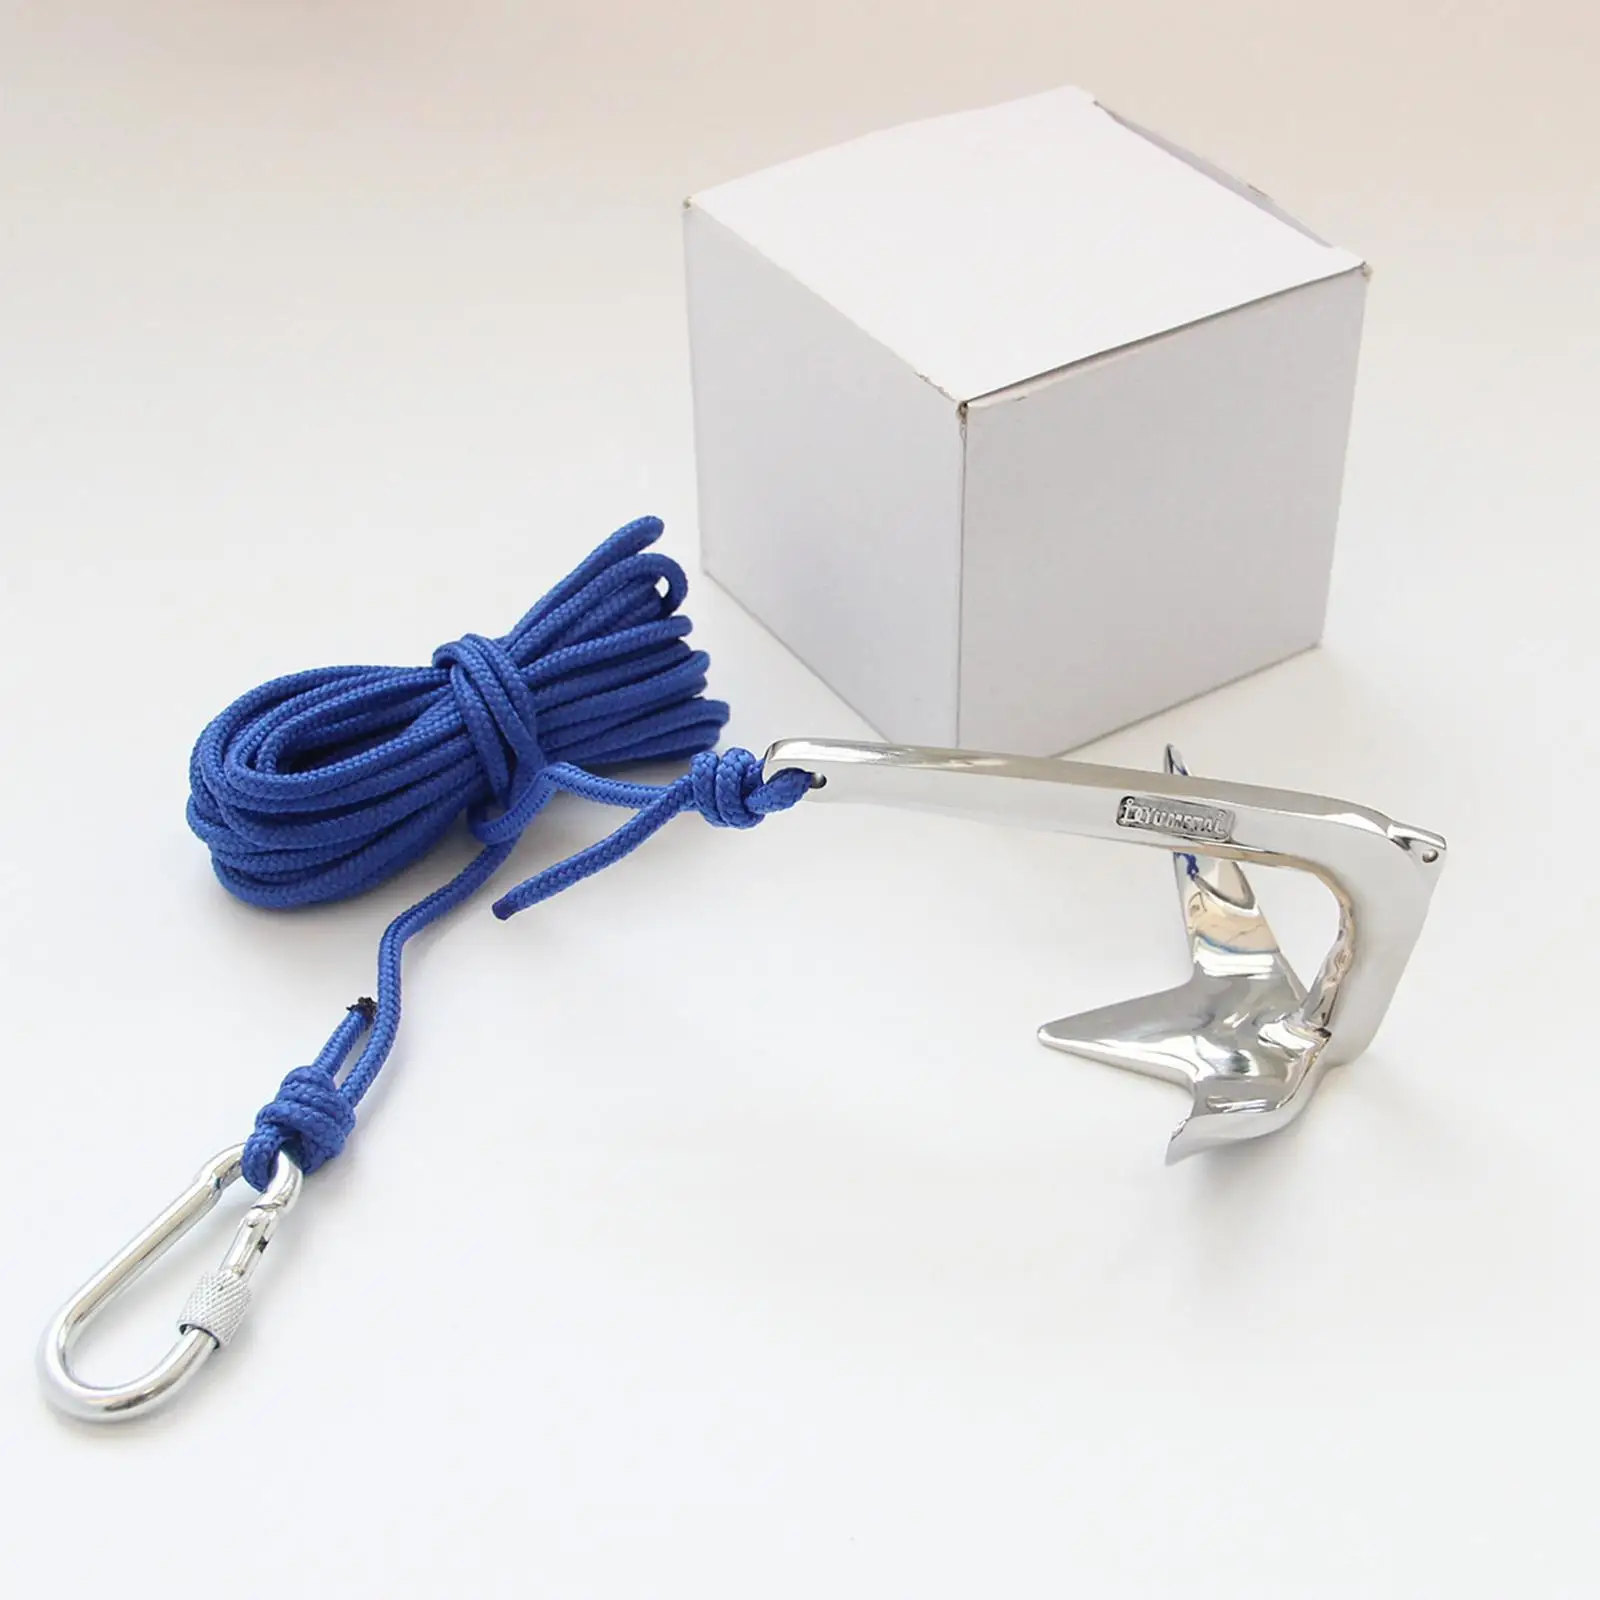 Bruce Style Boat Anchor Versatile Marine Accessories Polished with 5M Rope Fit for Kayak Boat Yacht Canoes Claw Anchor